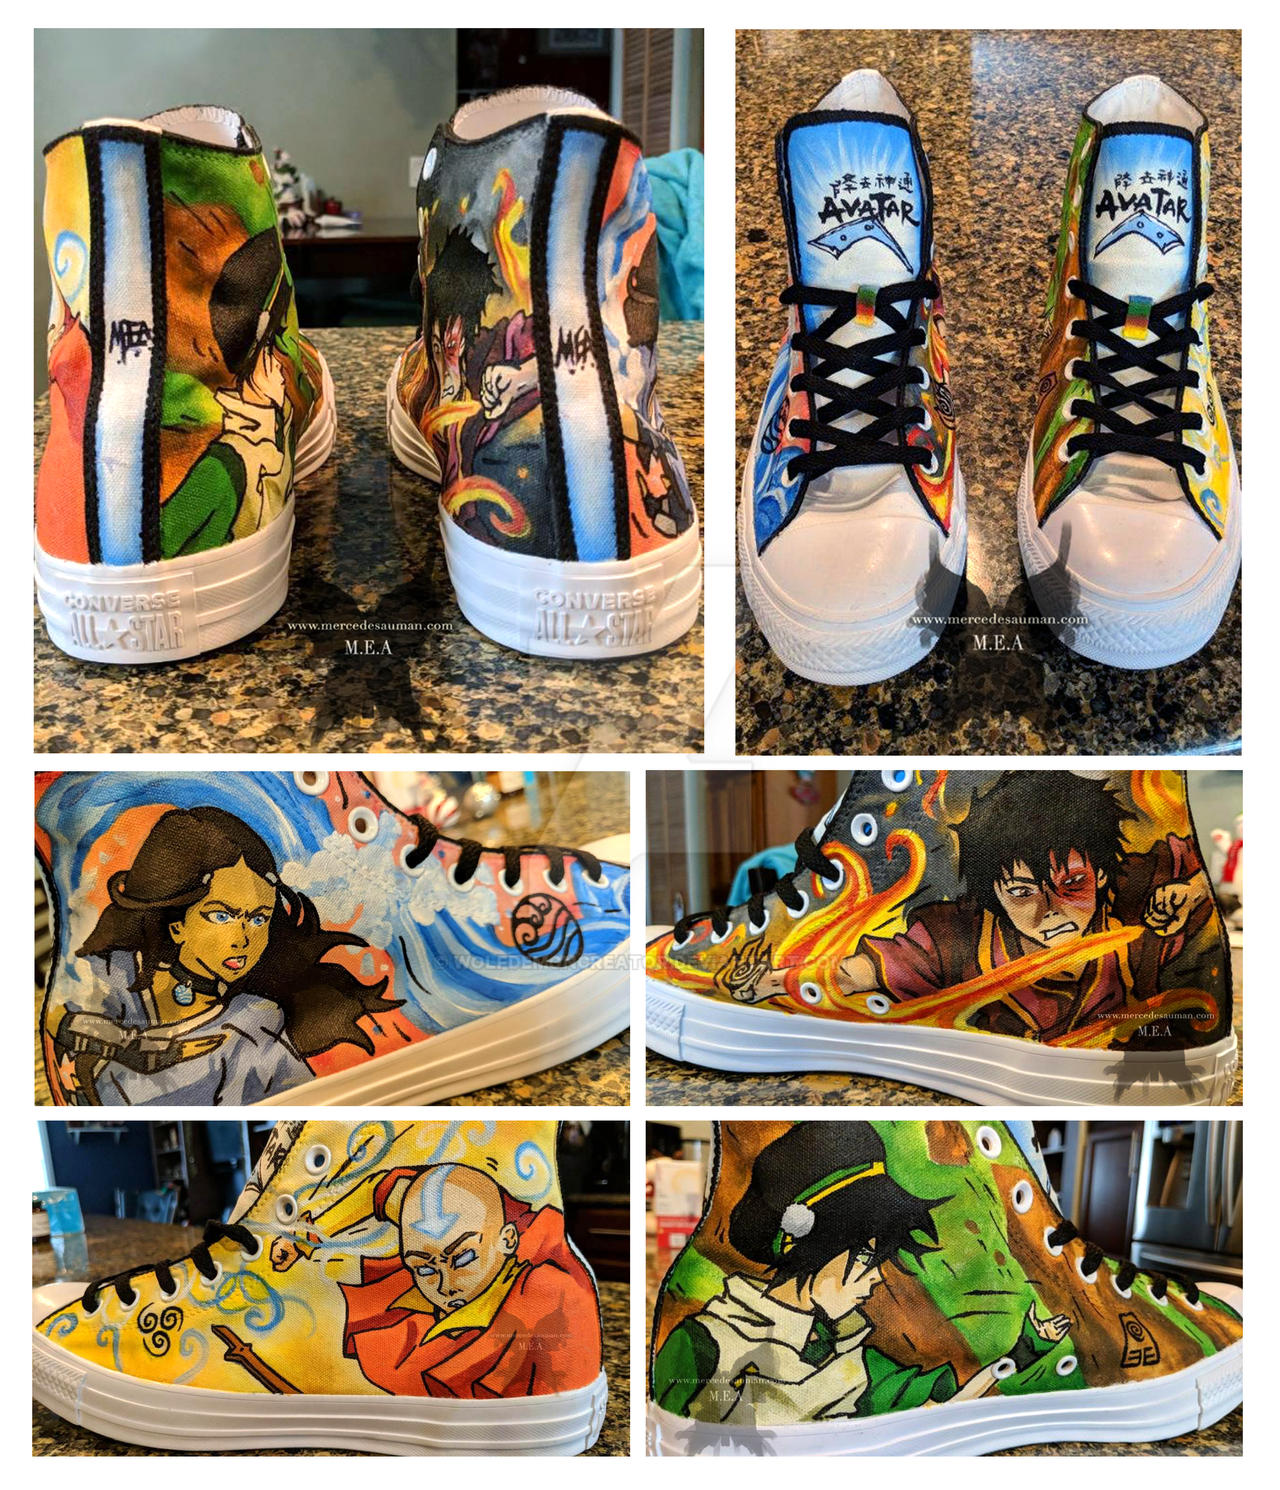 Avatar: The Last Airbender, painted shoes by wolfdemoncreator on DeviantArt